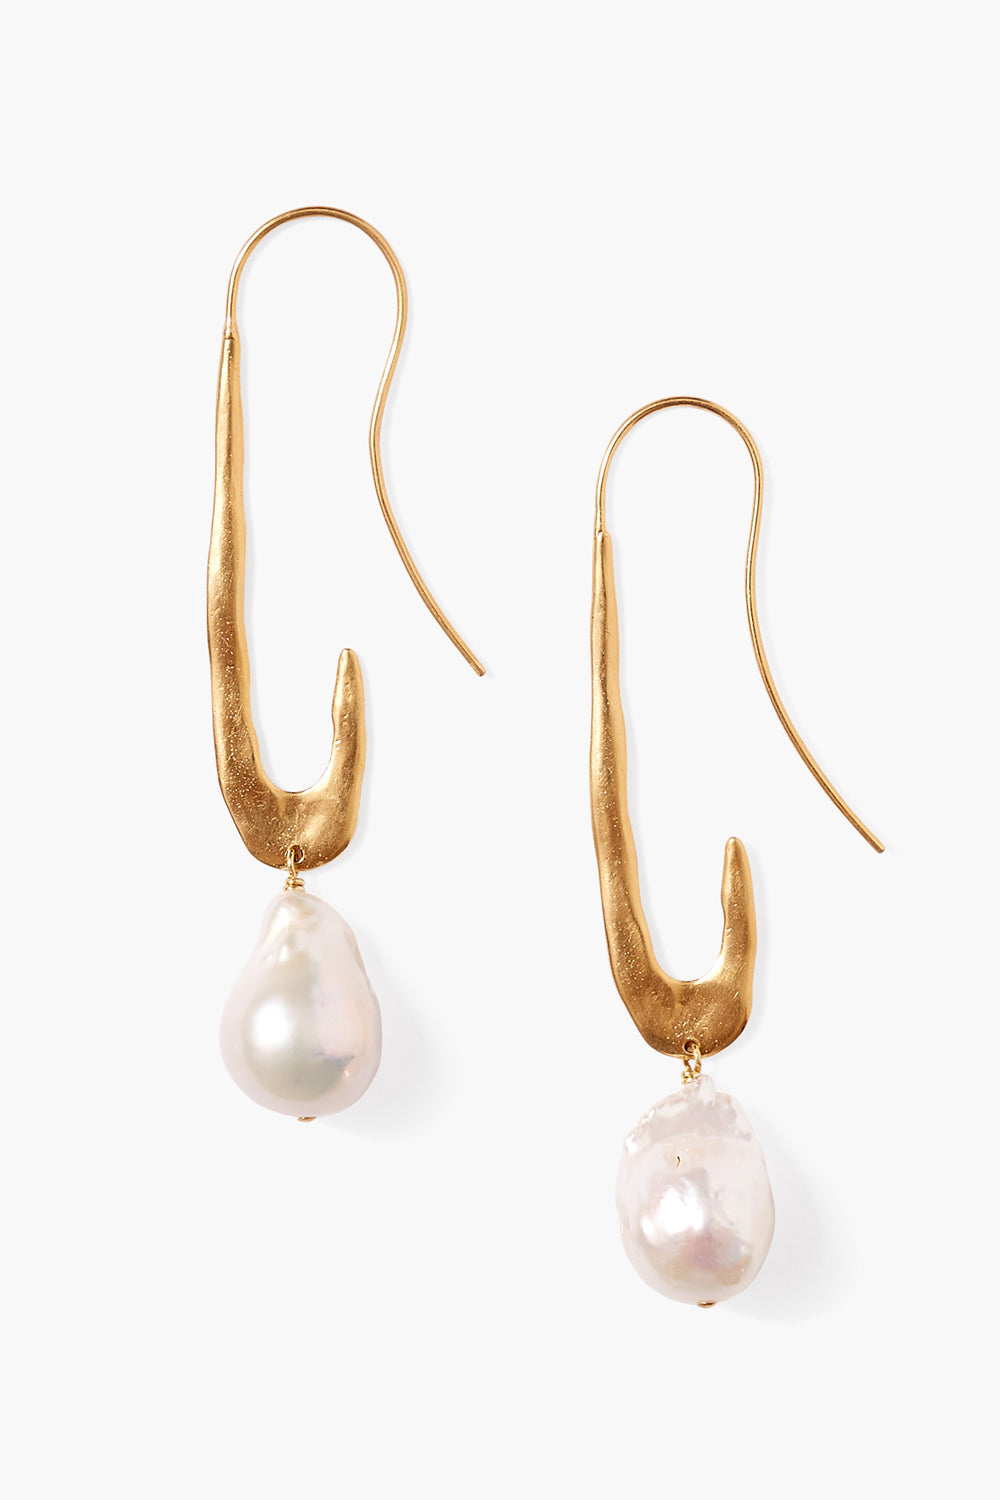 Gala Crescent Pearl Earrings Maxi Gold by Chan Luu | Gold/White Pearl